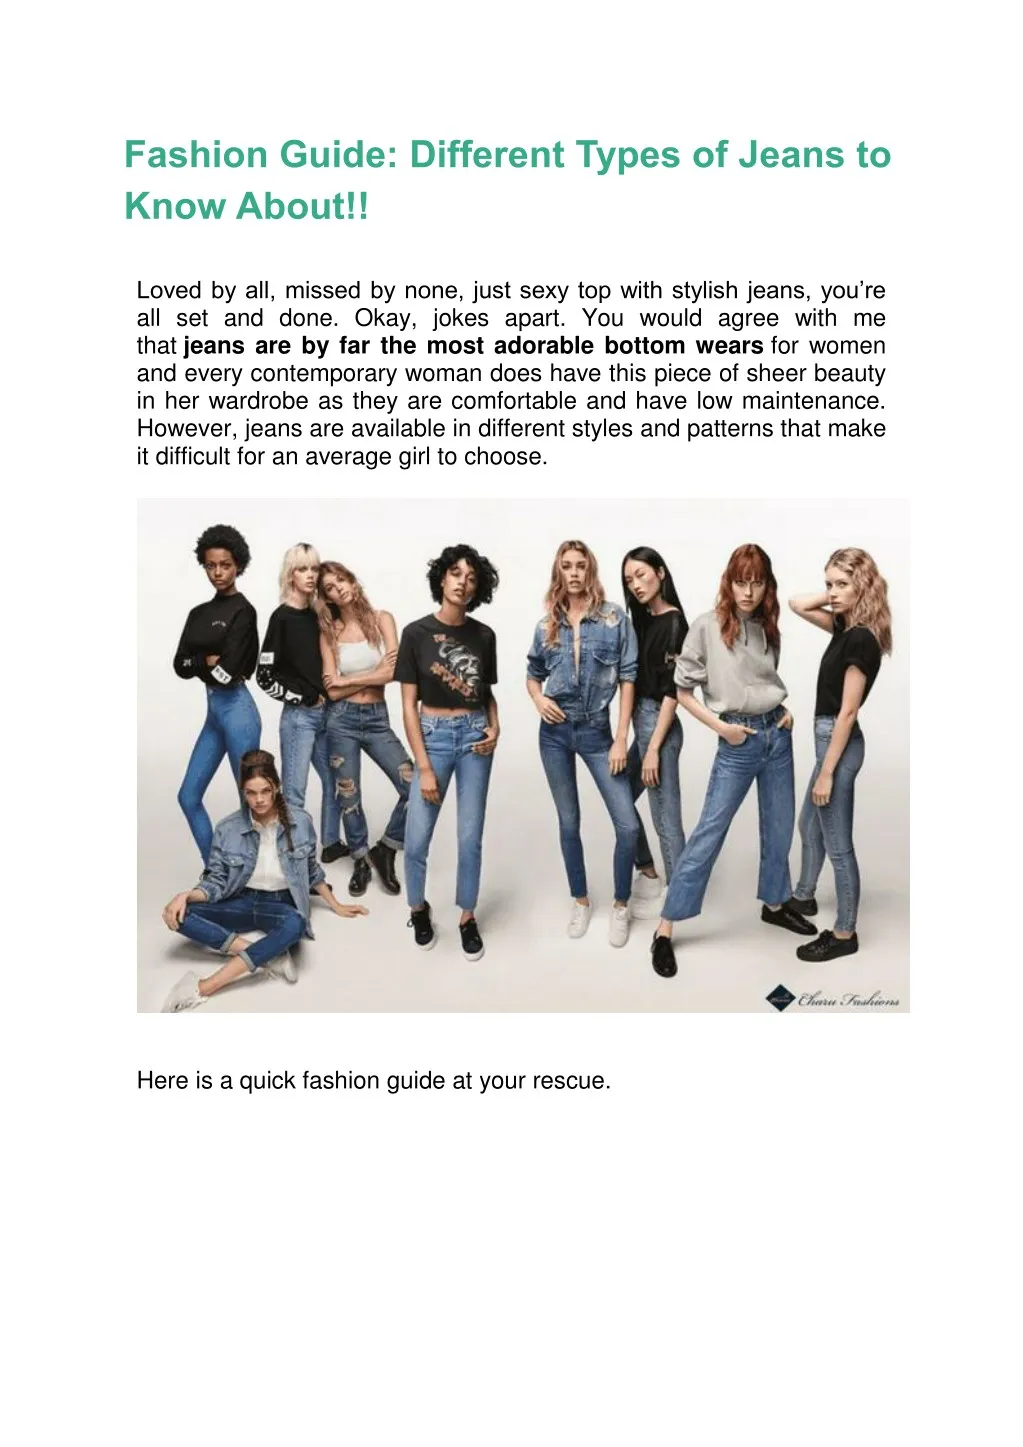 PPT - Fashion Guide: Different Types of Jeans to Know About ...